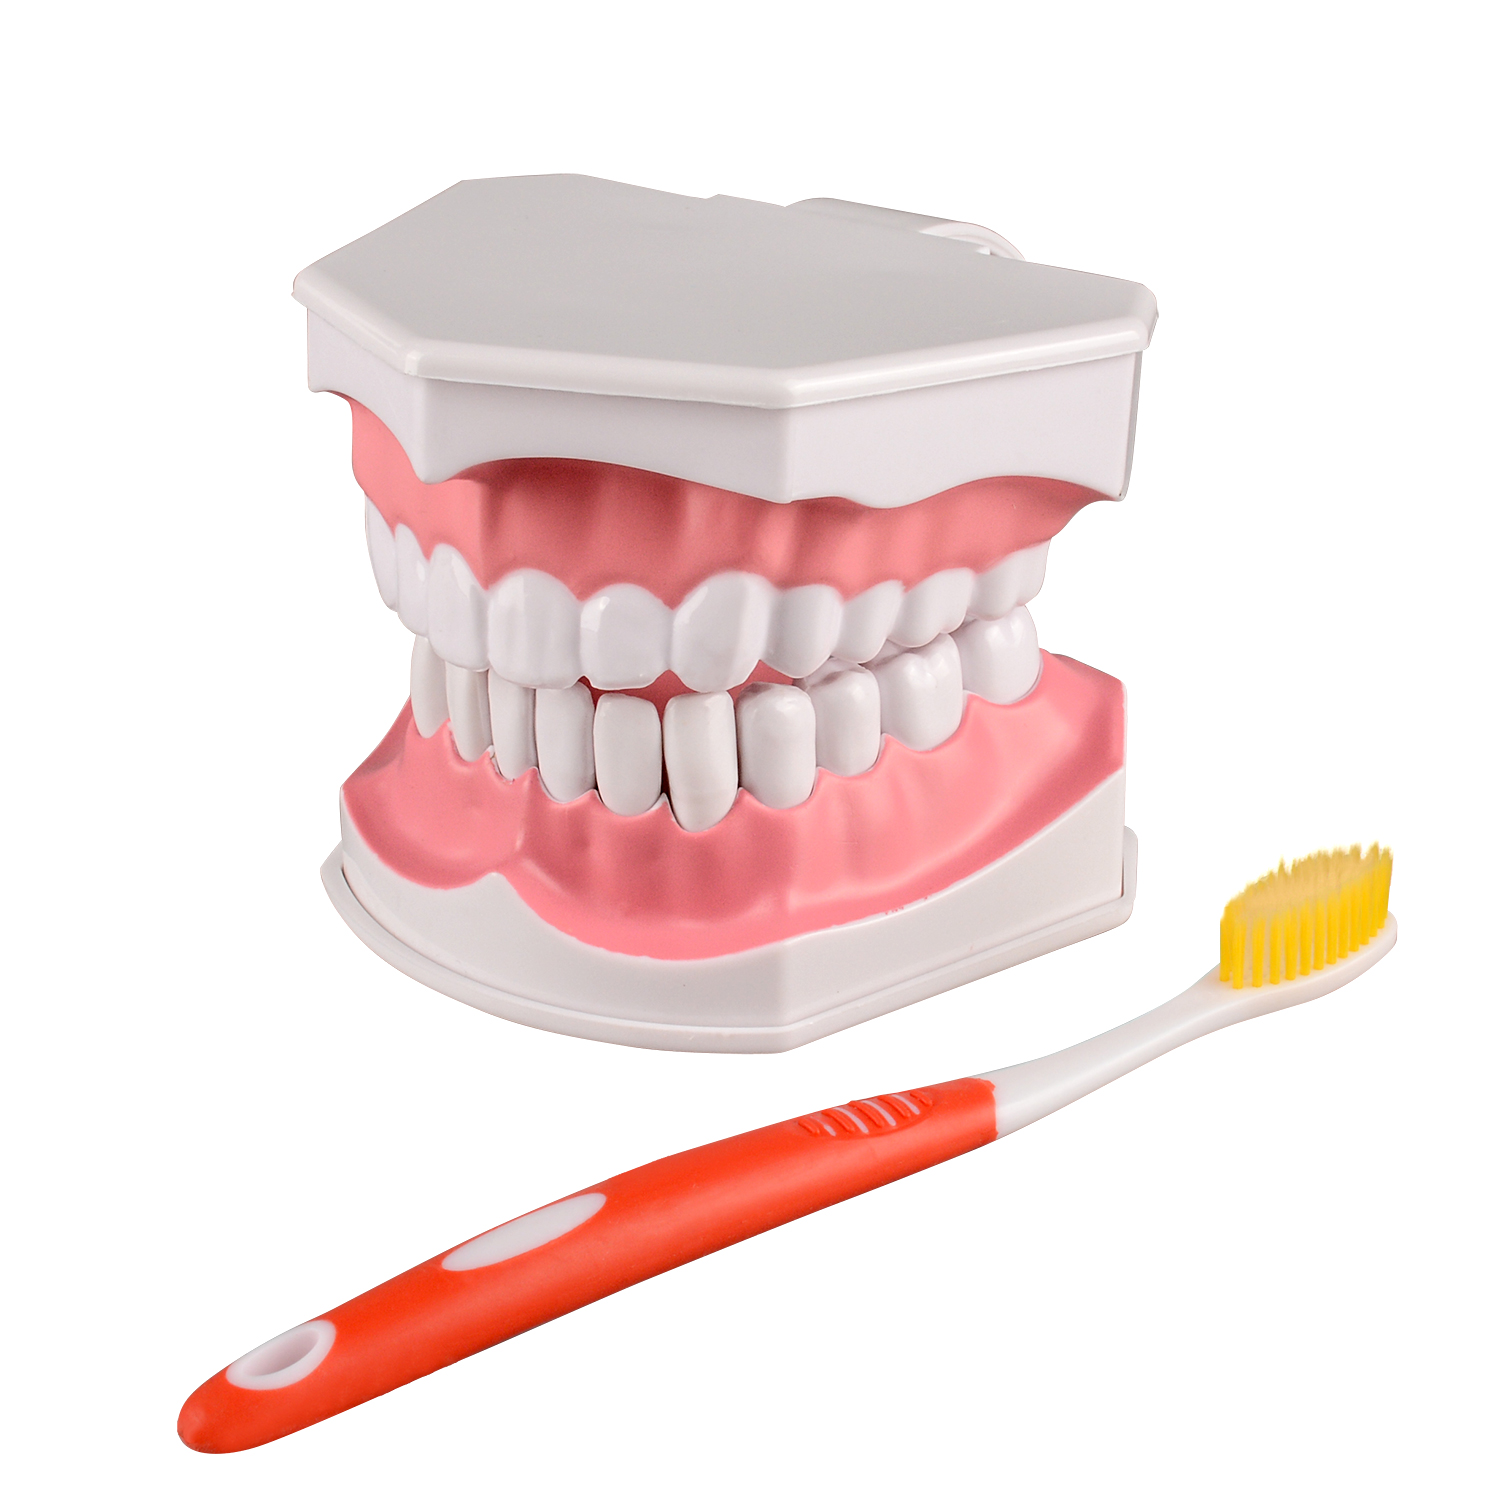 Adult Tooth Brushing Model, 2 Times Enlarge for Dental Teaching